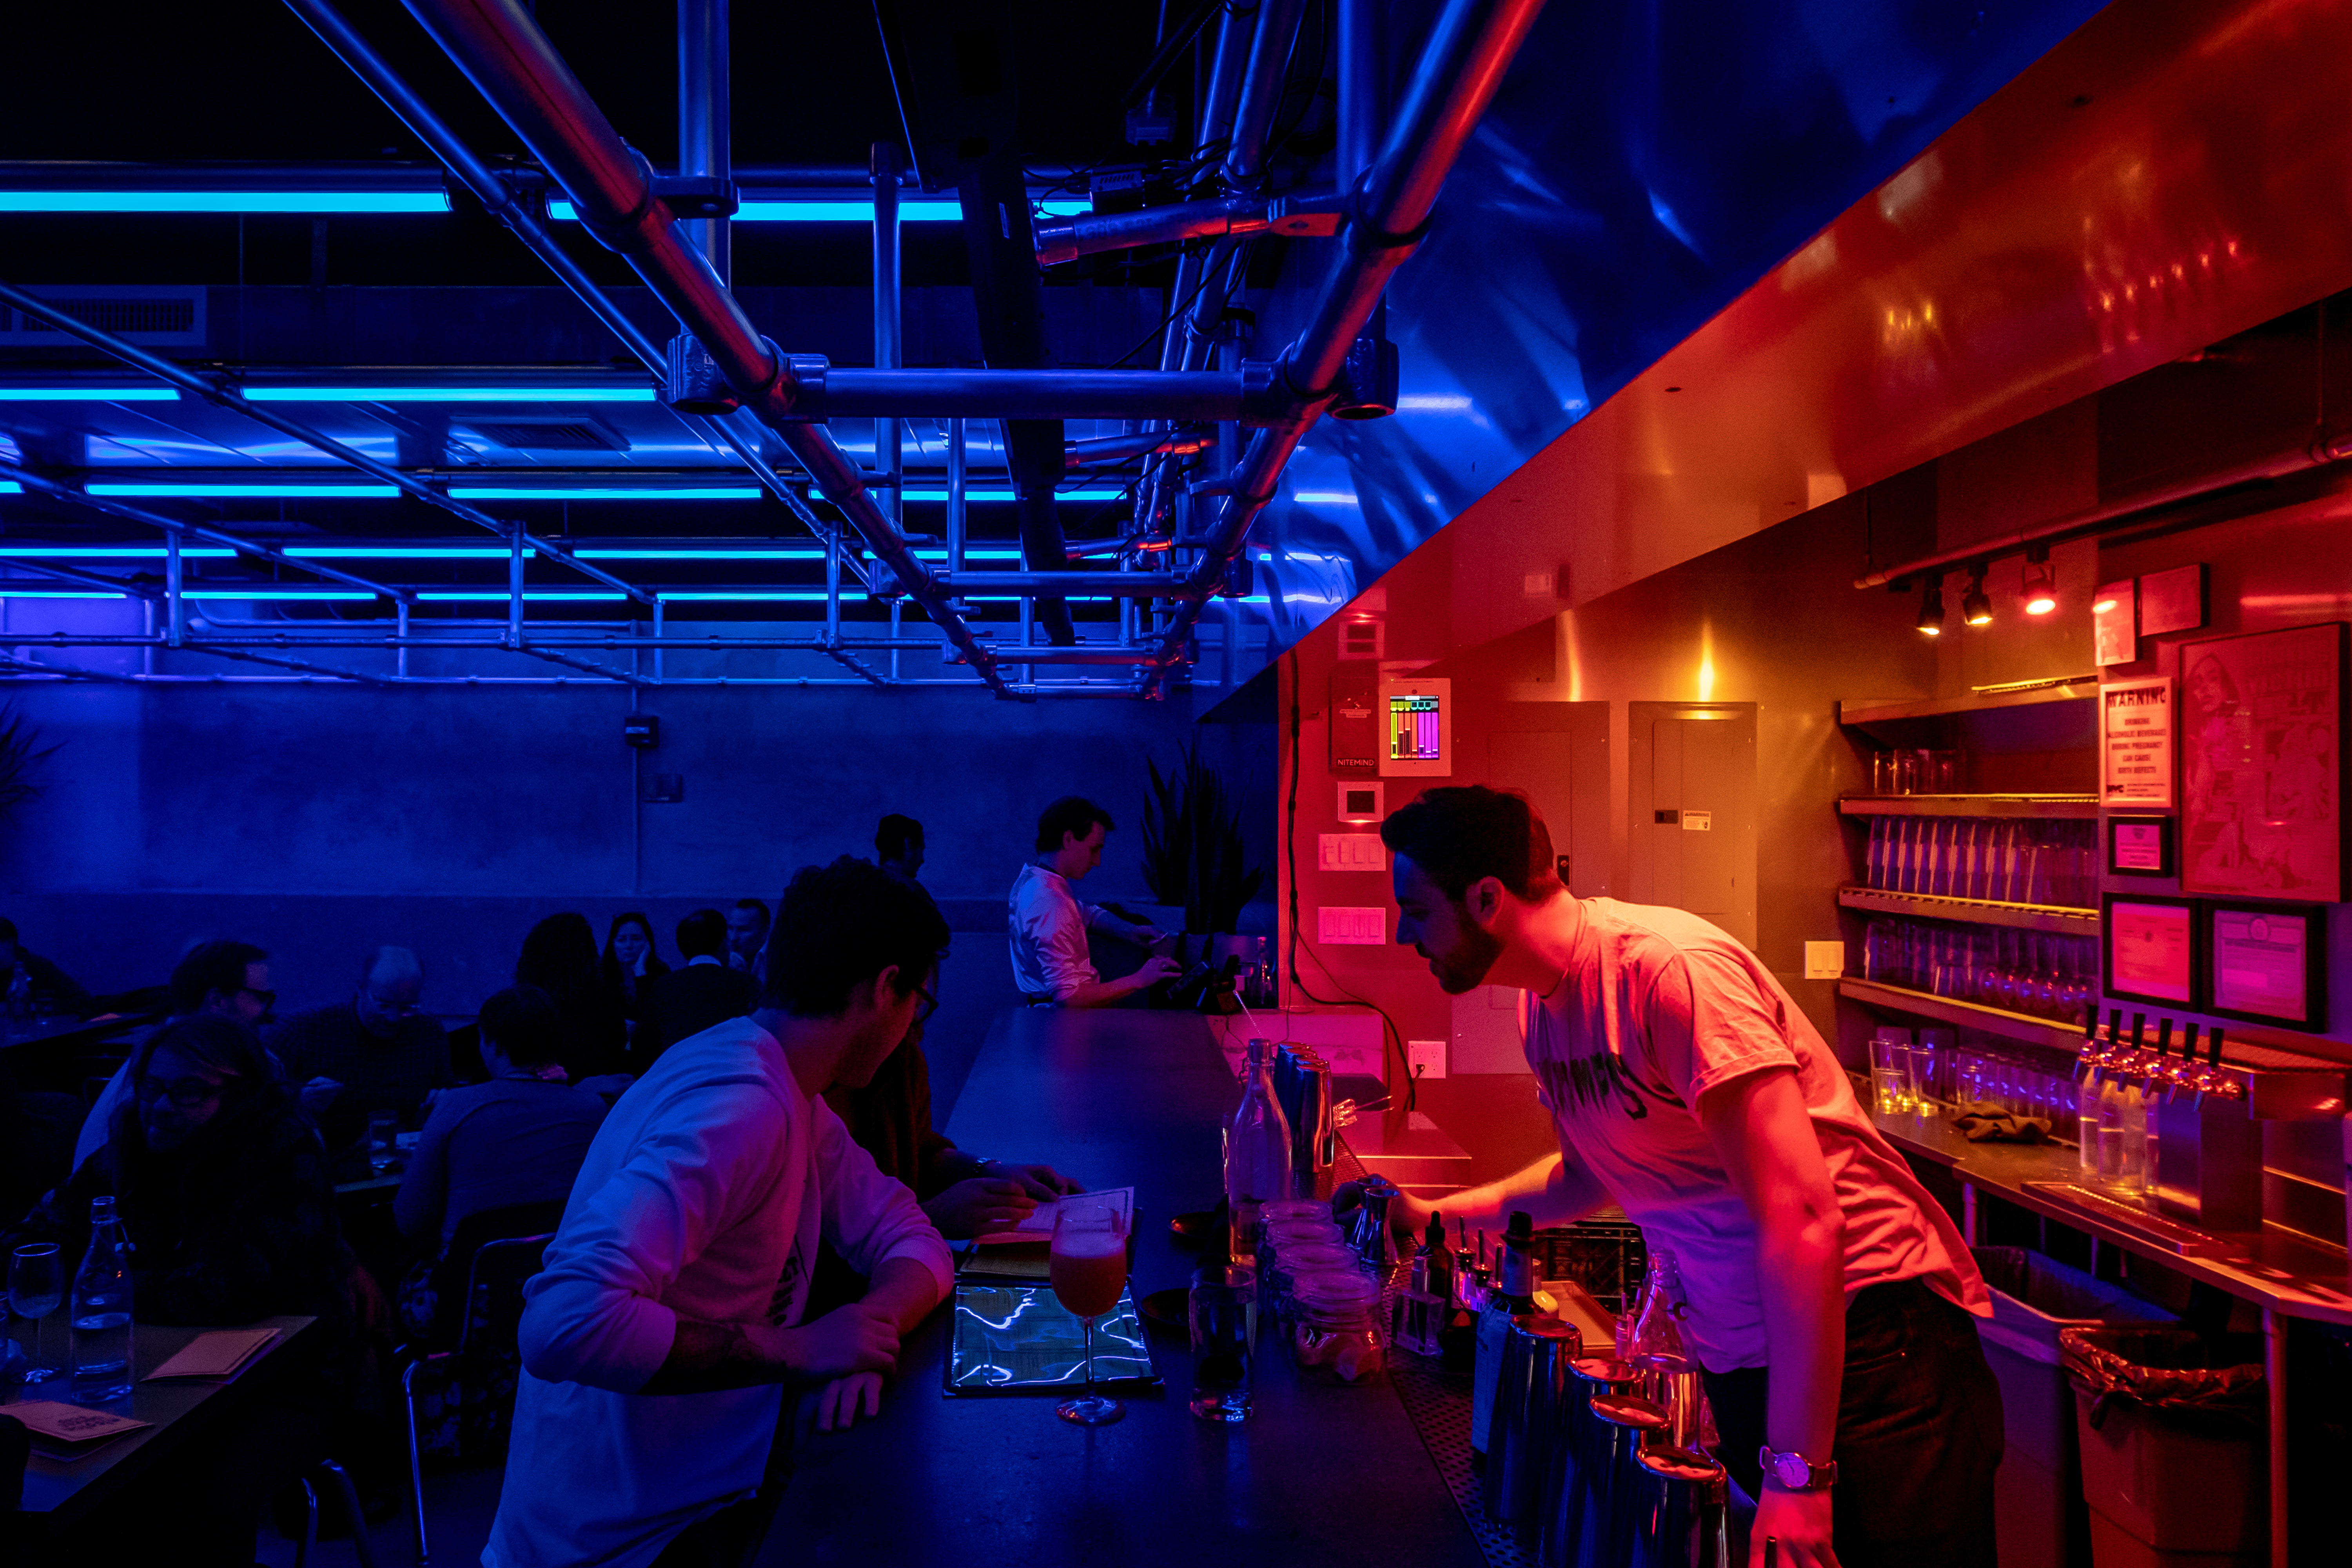 A dimly lit bar with red and blue neon lights in an industrial space.